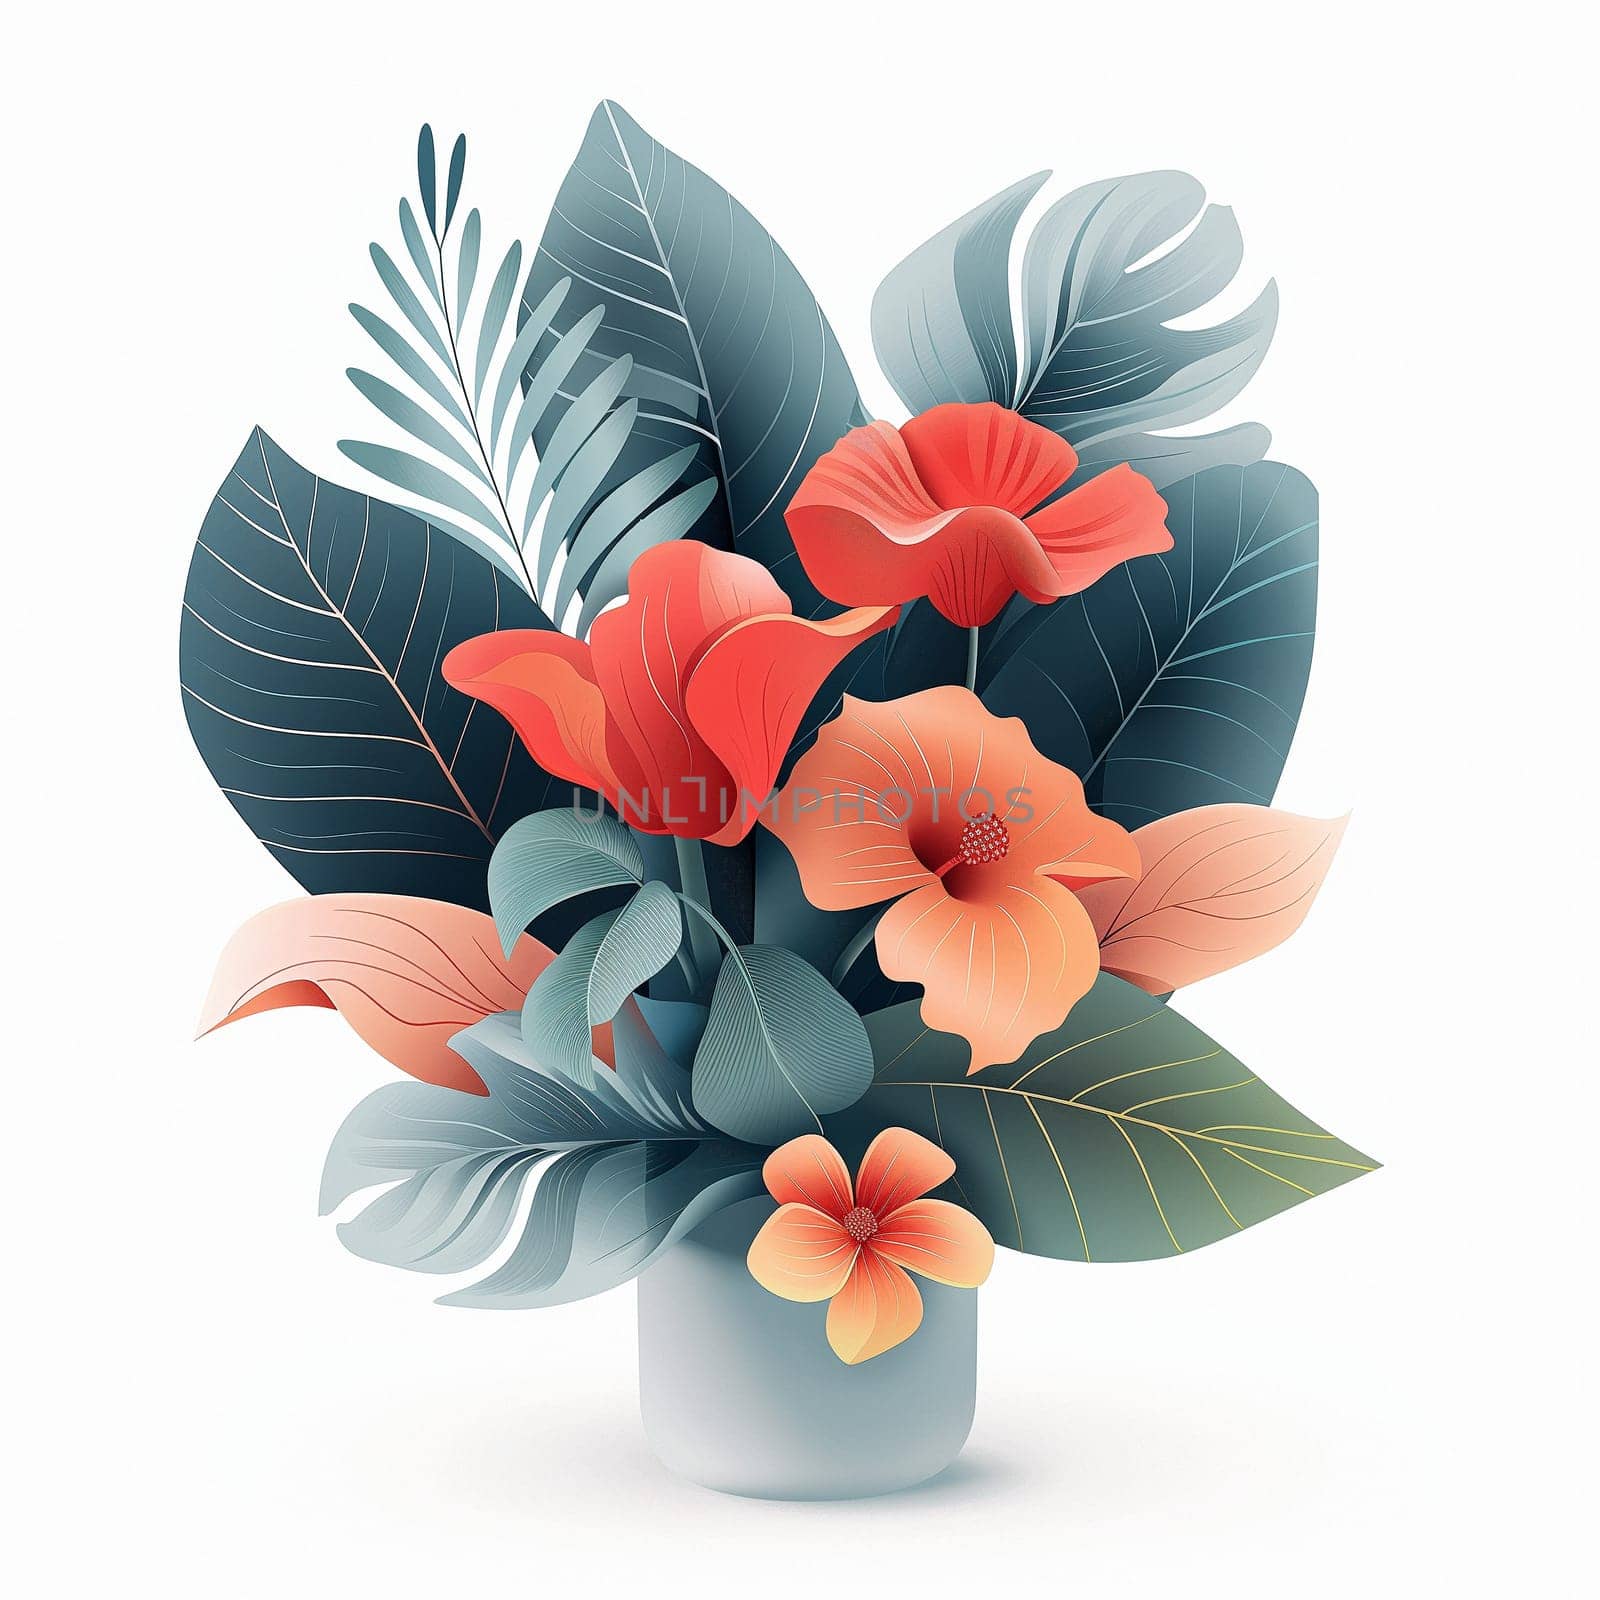 A composition of 3D flowers on an isolated white background by NeuroSky